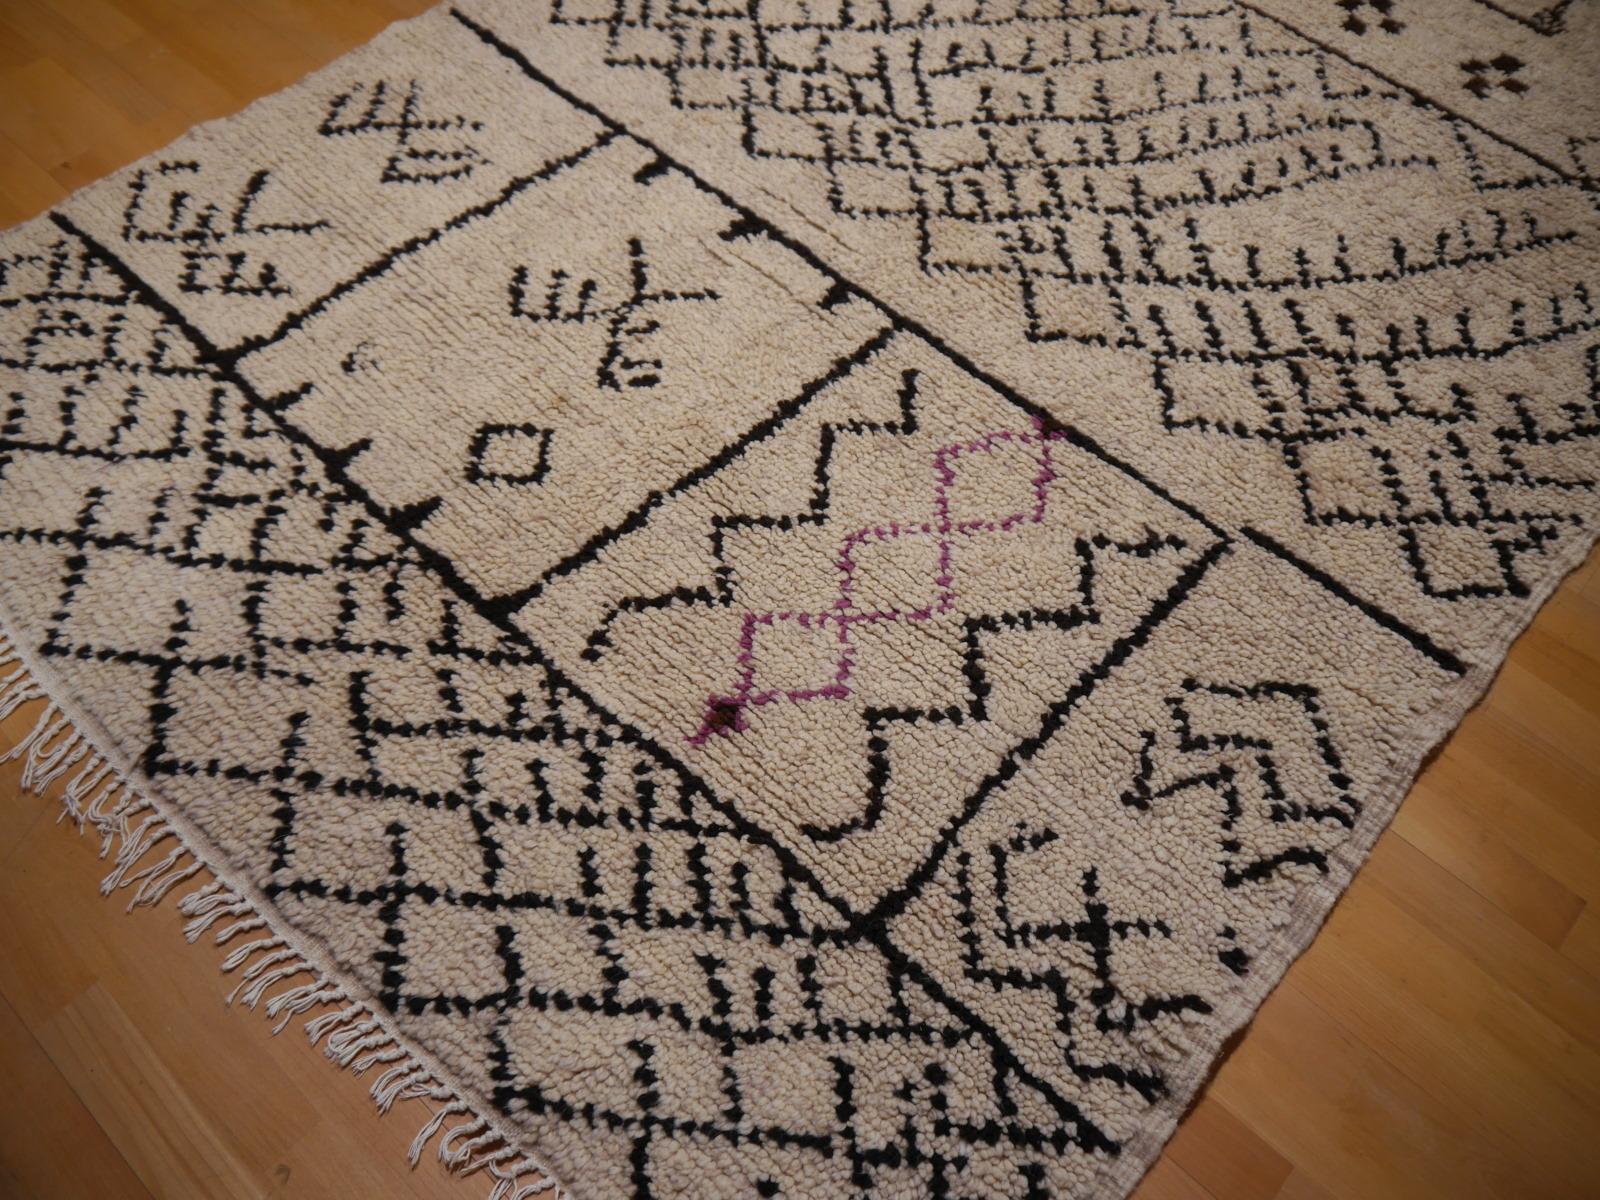 Beuatiful hand-knotted tribal Berber rug from the Azilal tribe. Hand-knotted with fine hand spun wool.